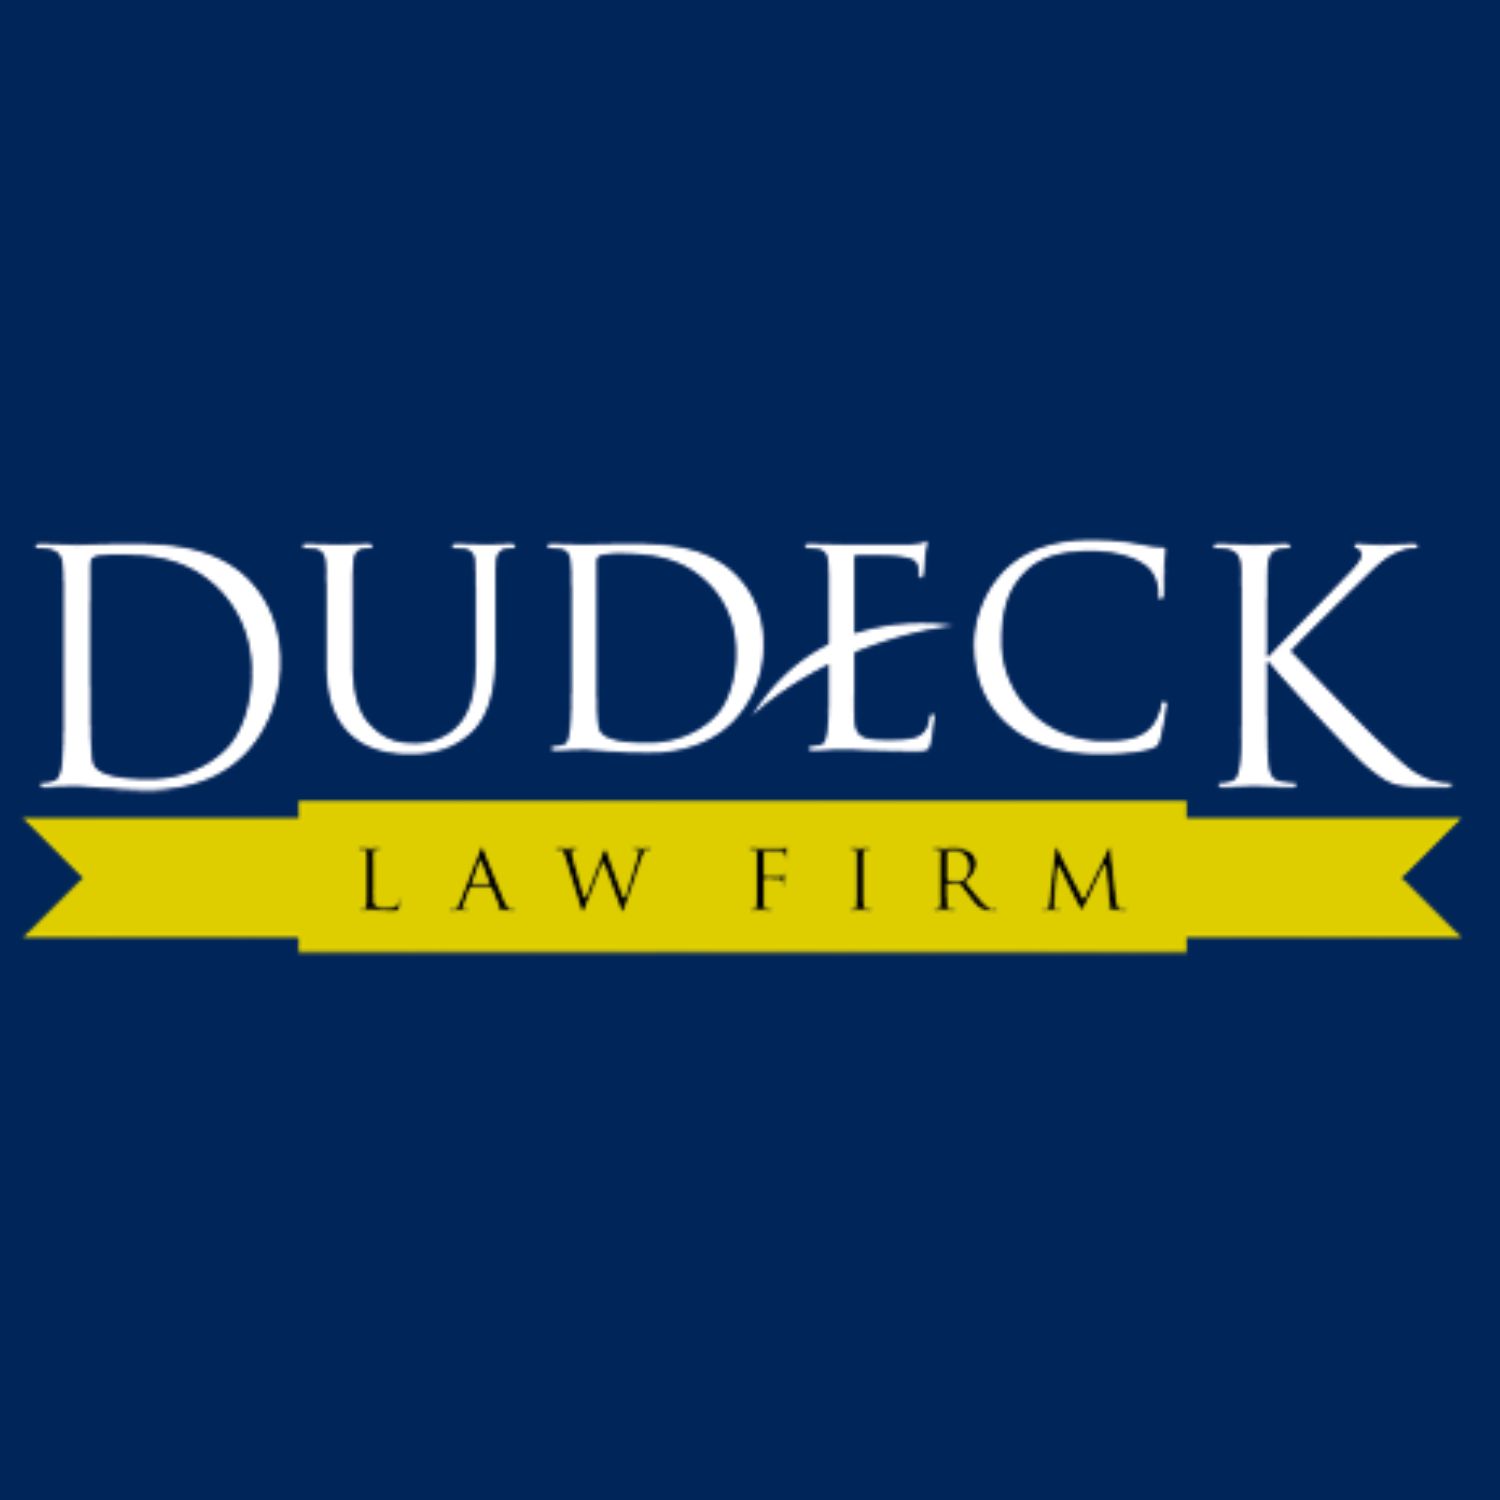 Dudeck Law Firm Profile Picture